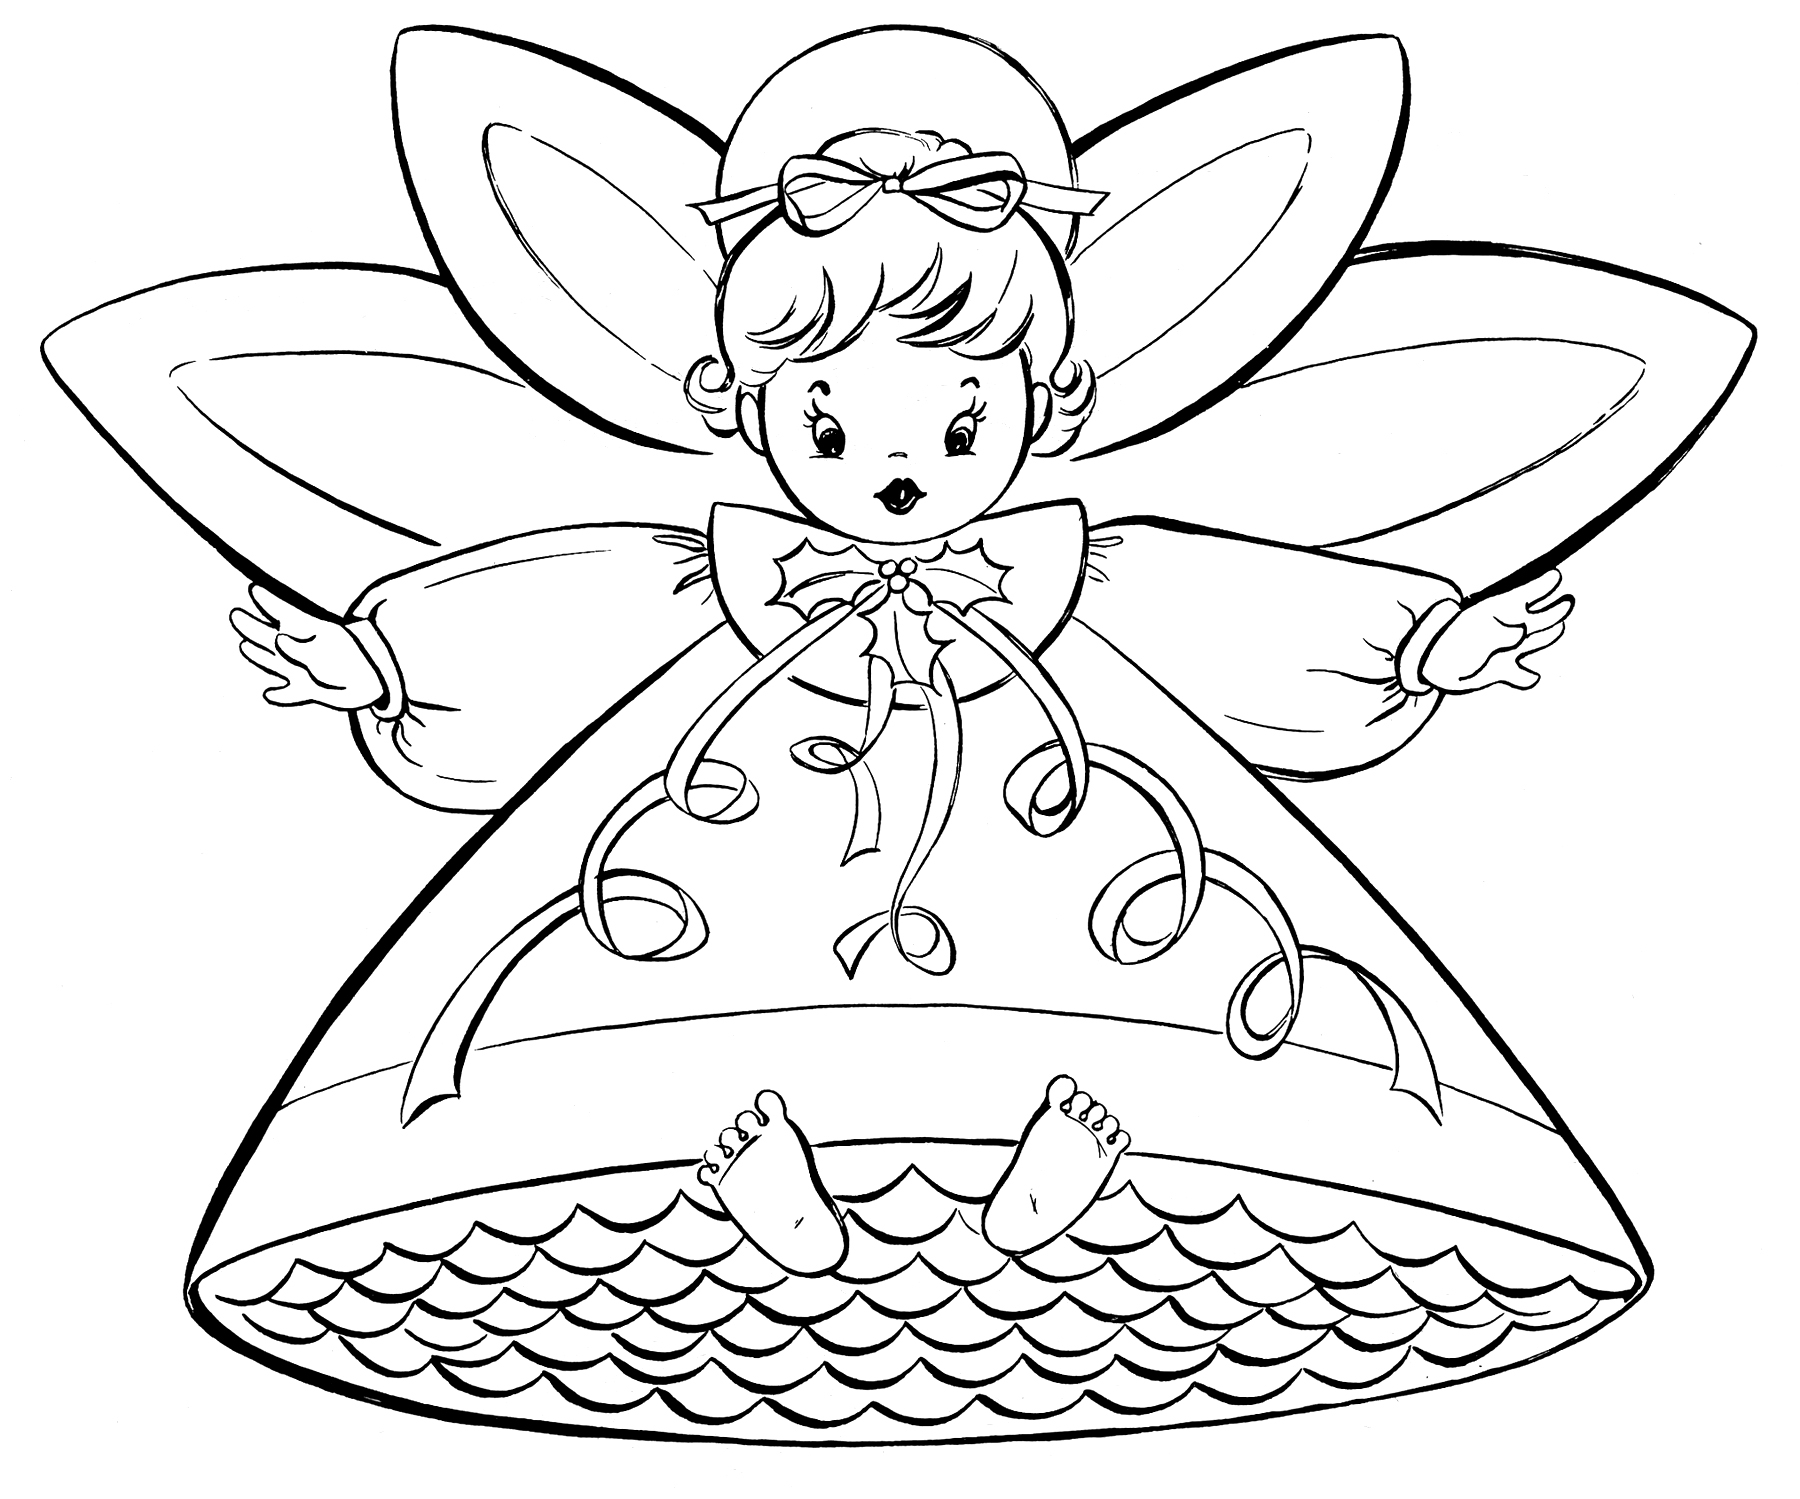 Old Fashioned Christmas Coloring Pages at GetColorings.com ...